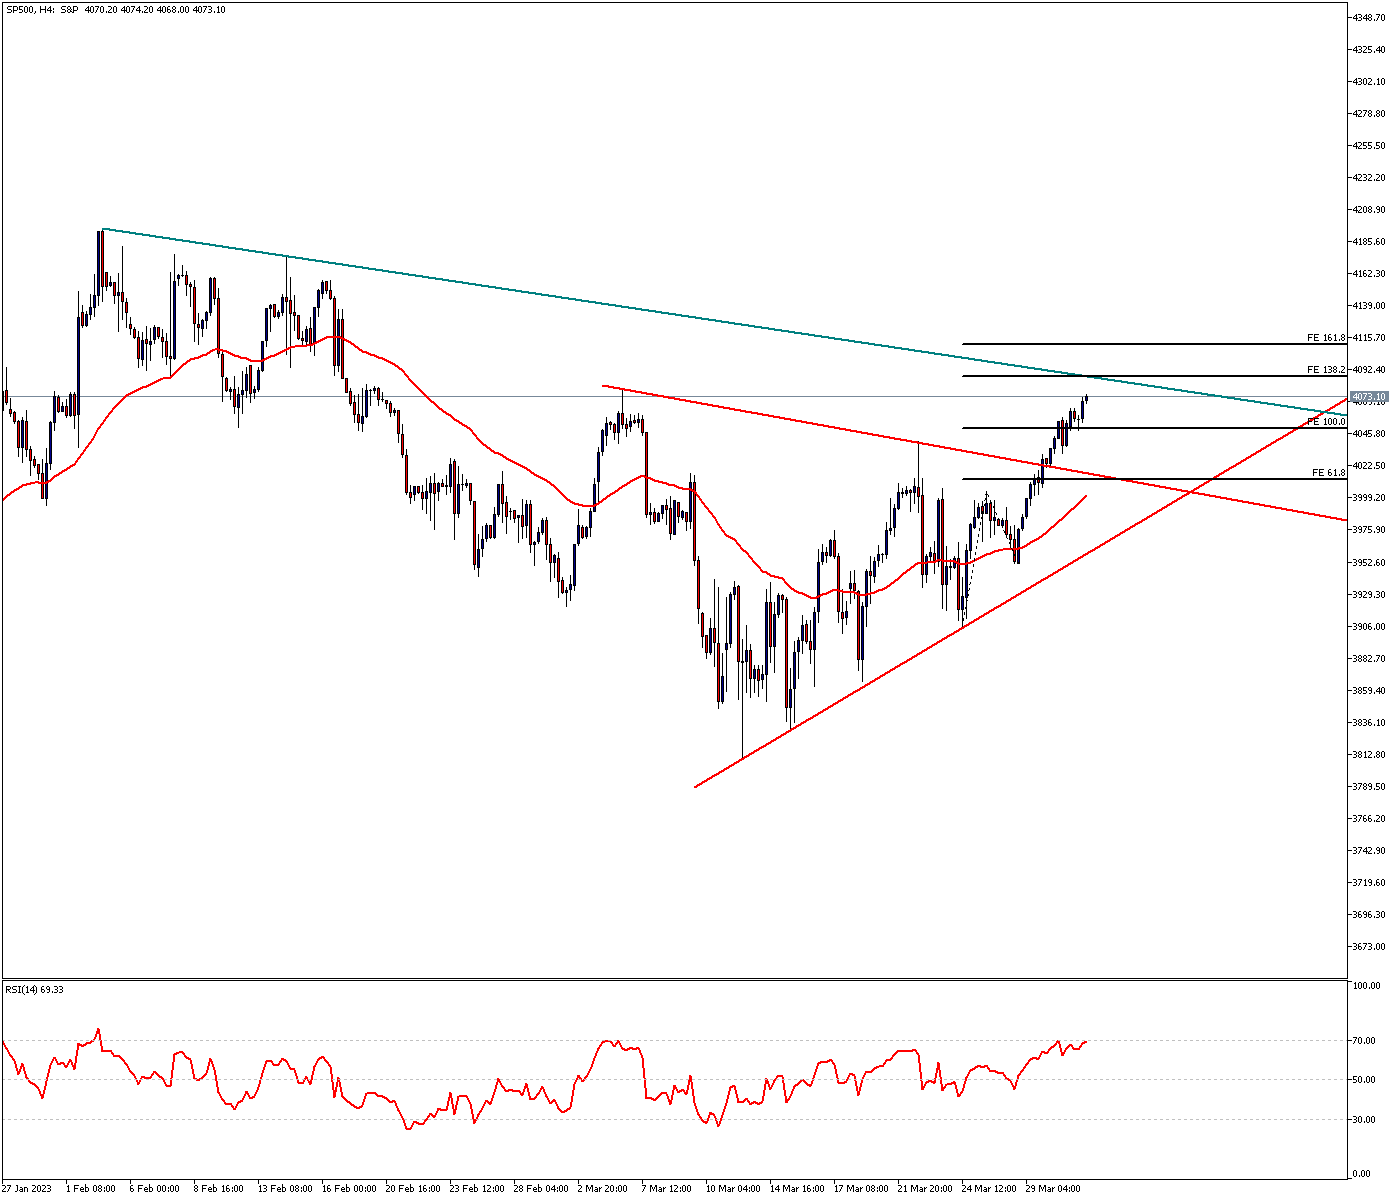 SP500 May Test Downtrend